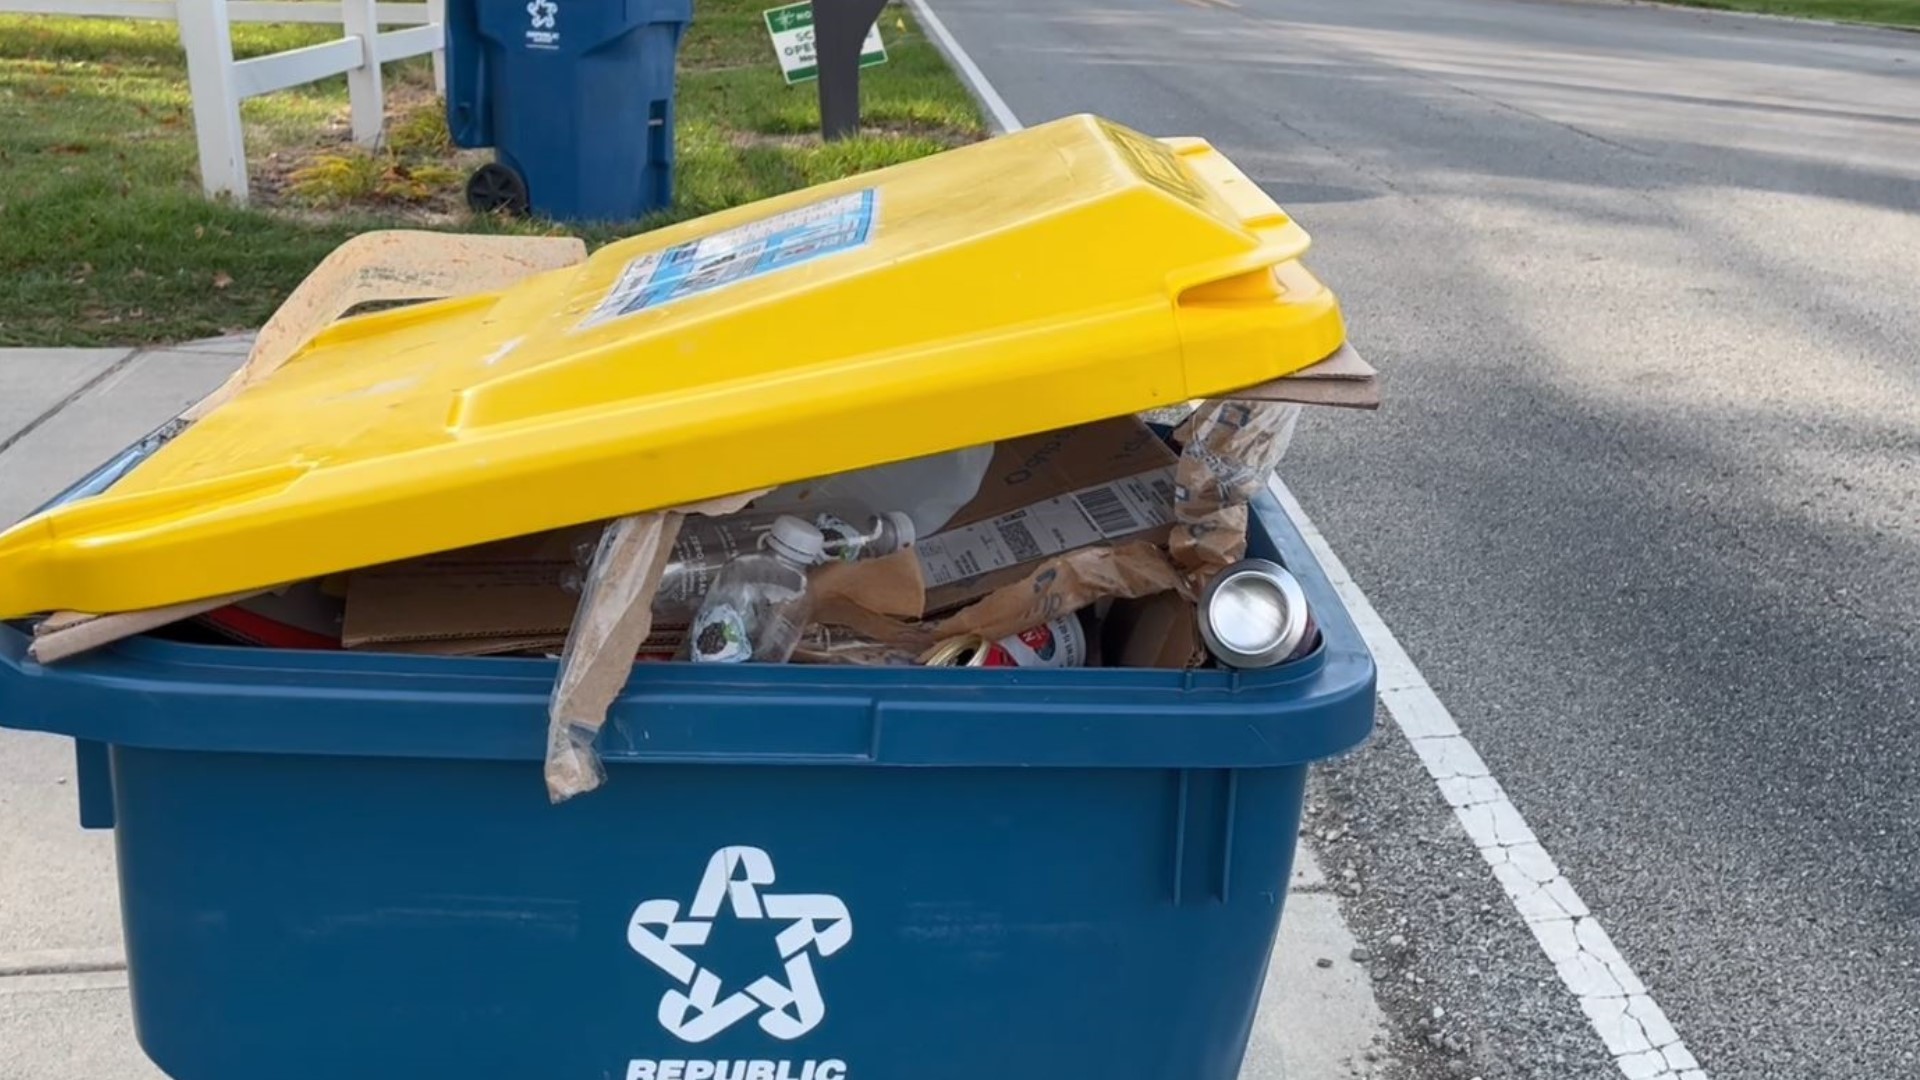 13 Investigates worked with local families to track their curbside recycling, utilizing both undercover surveillance and technology to follow recyclable materials.